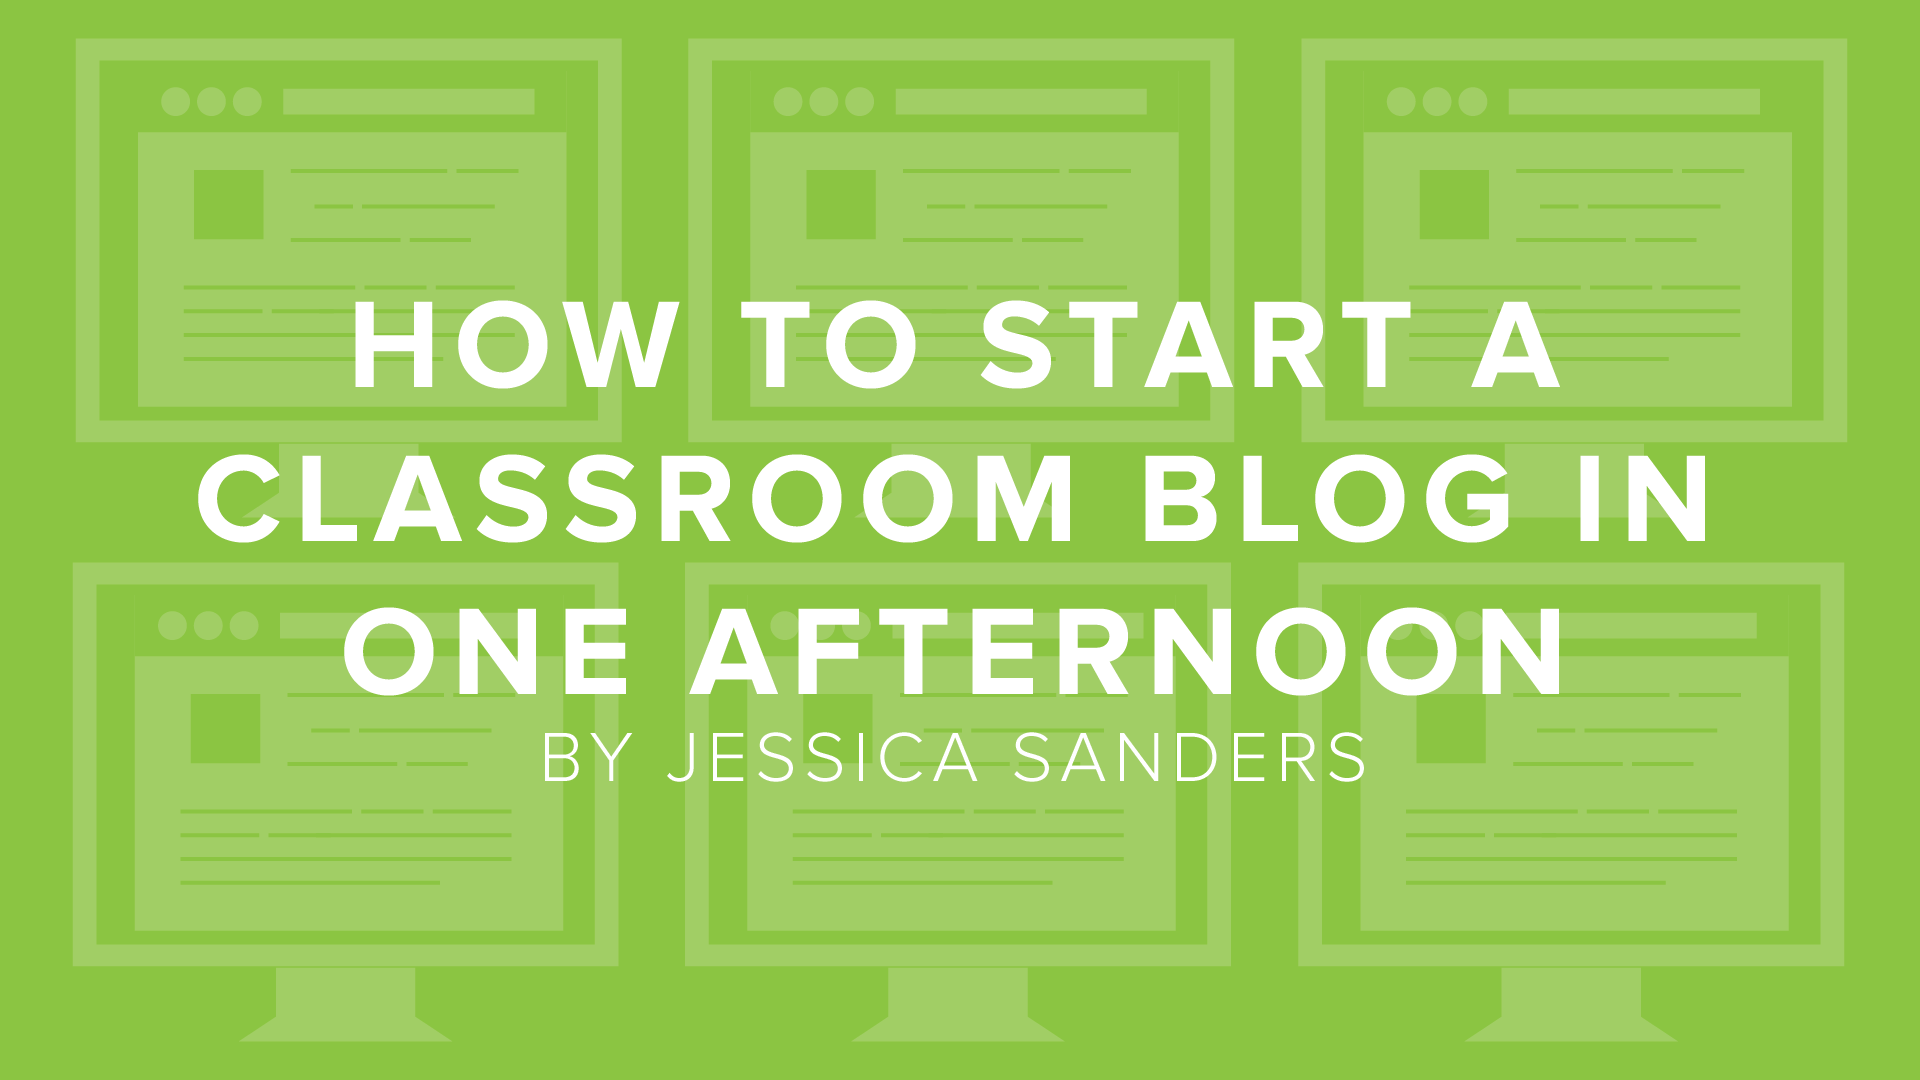 DigitalChalk: How to Start a Classroom Blog in One Afternoon by Jessica Sanders